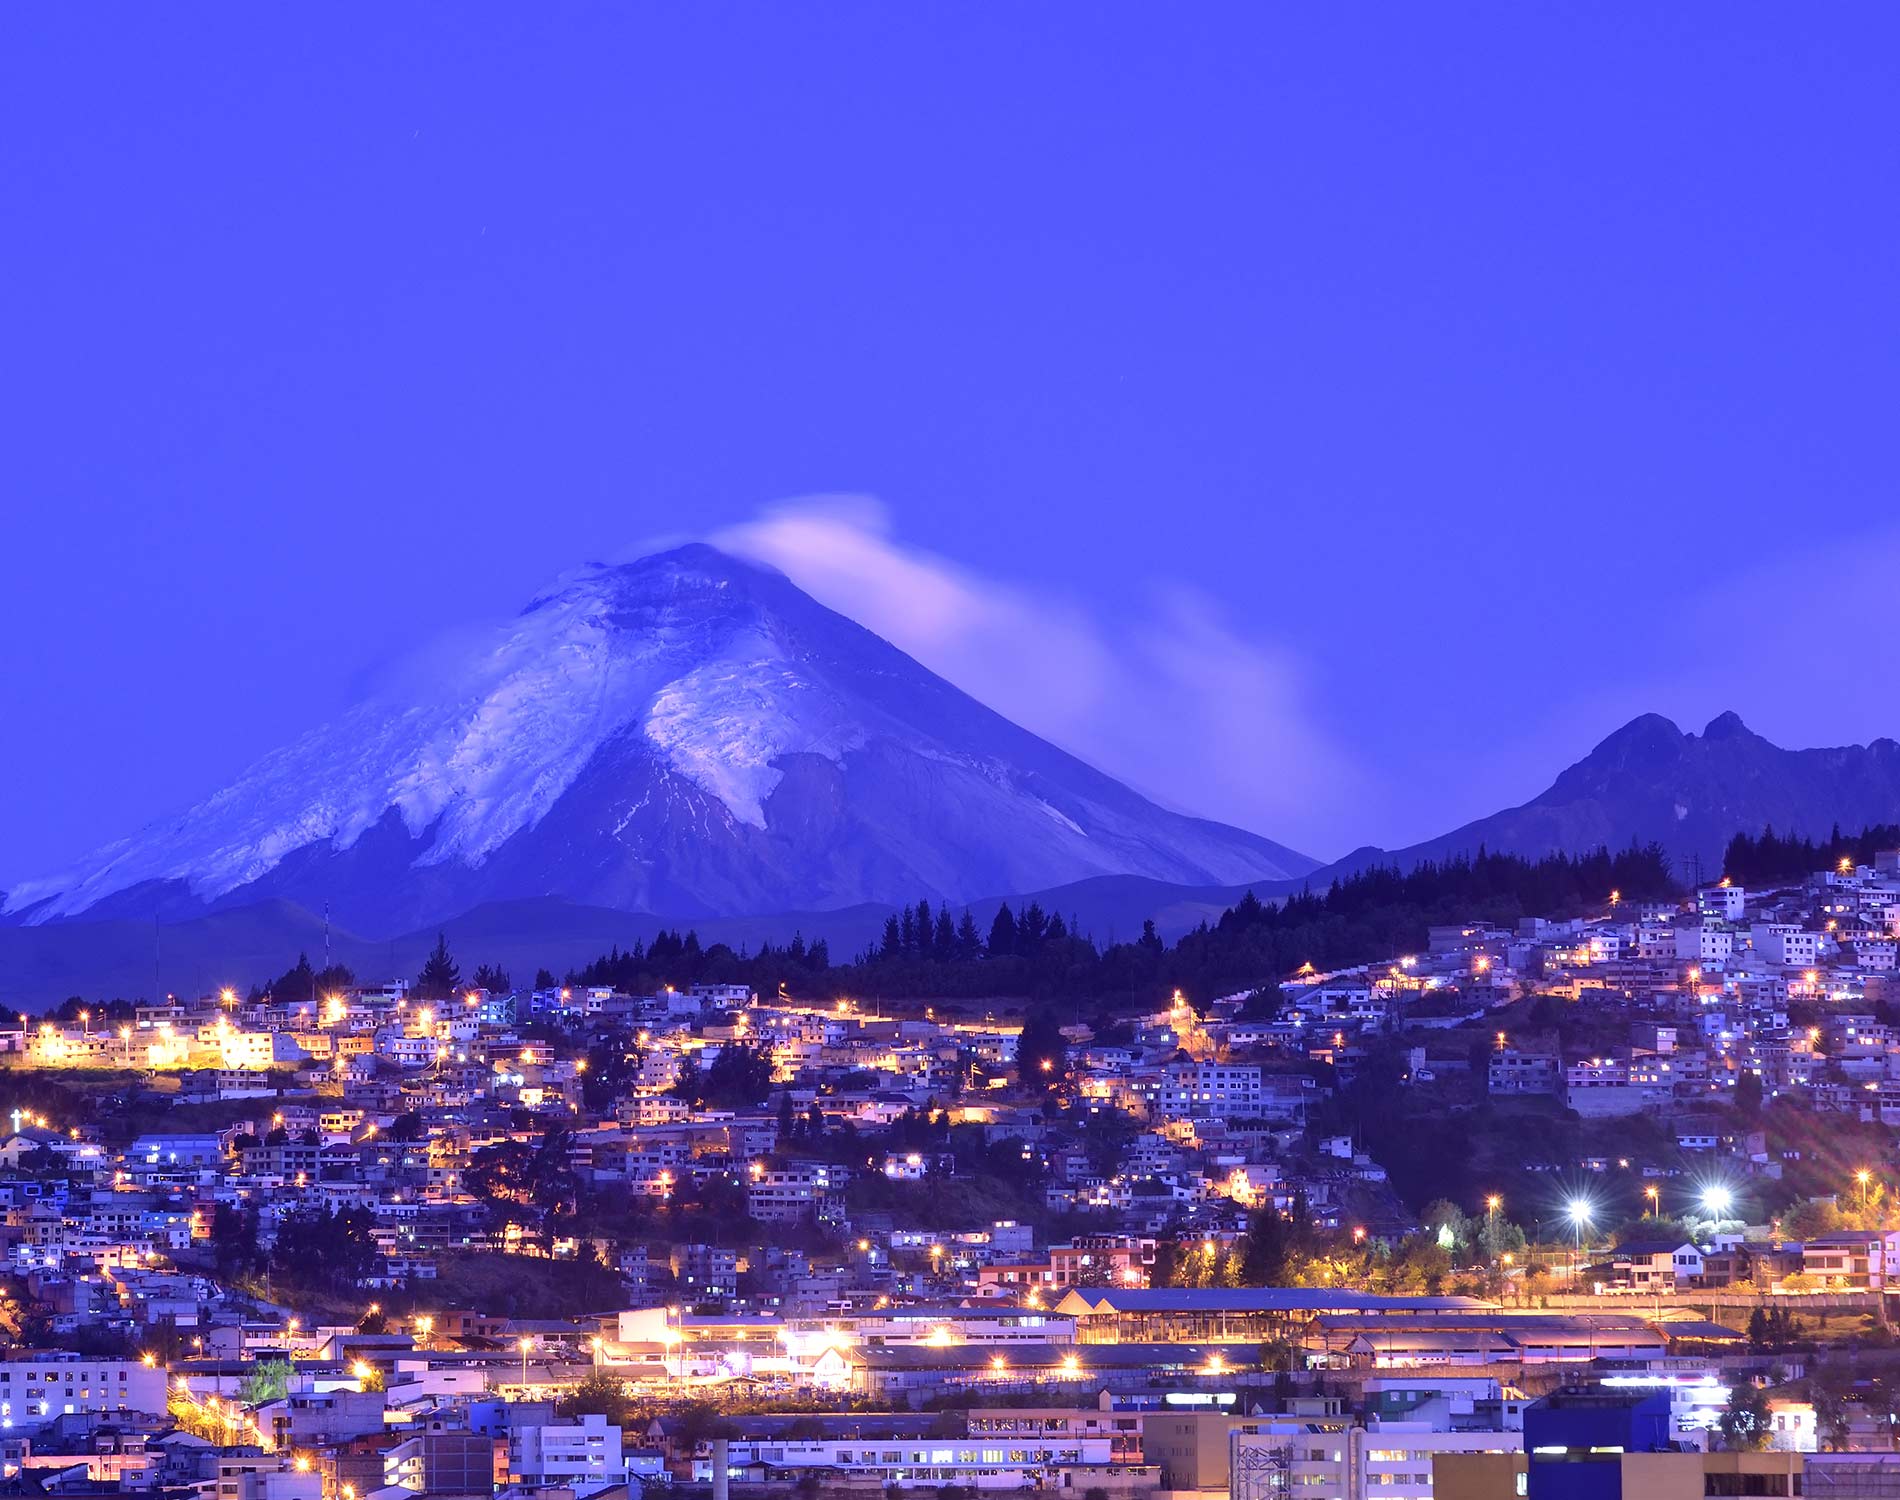 /-/media/images/website/background-images/offices/quito/quito.ashx?sc_lang=pl-pl